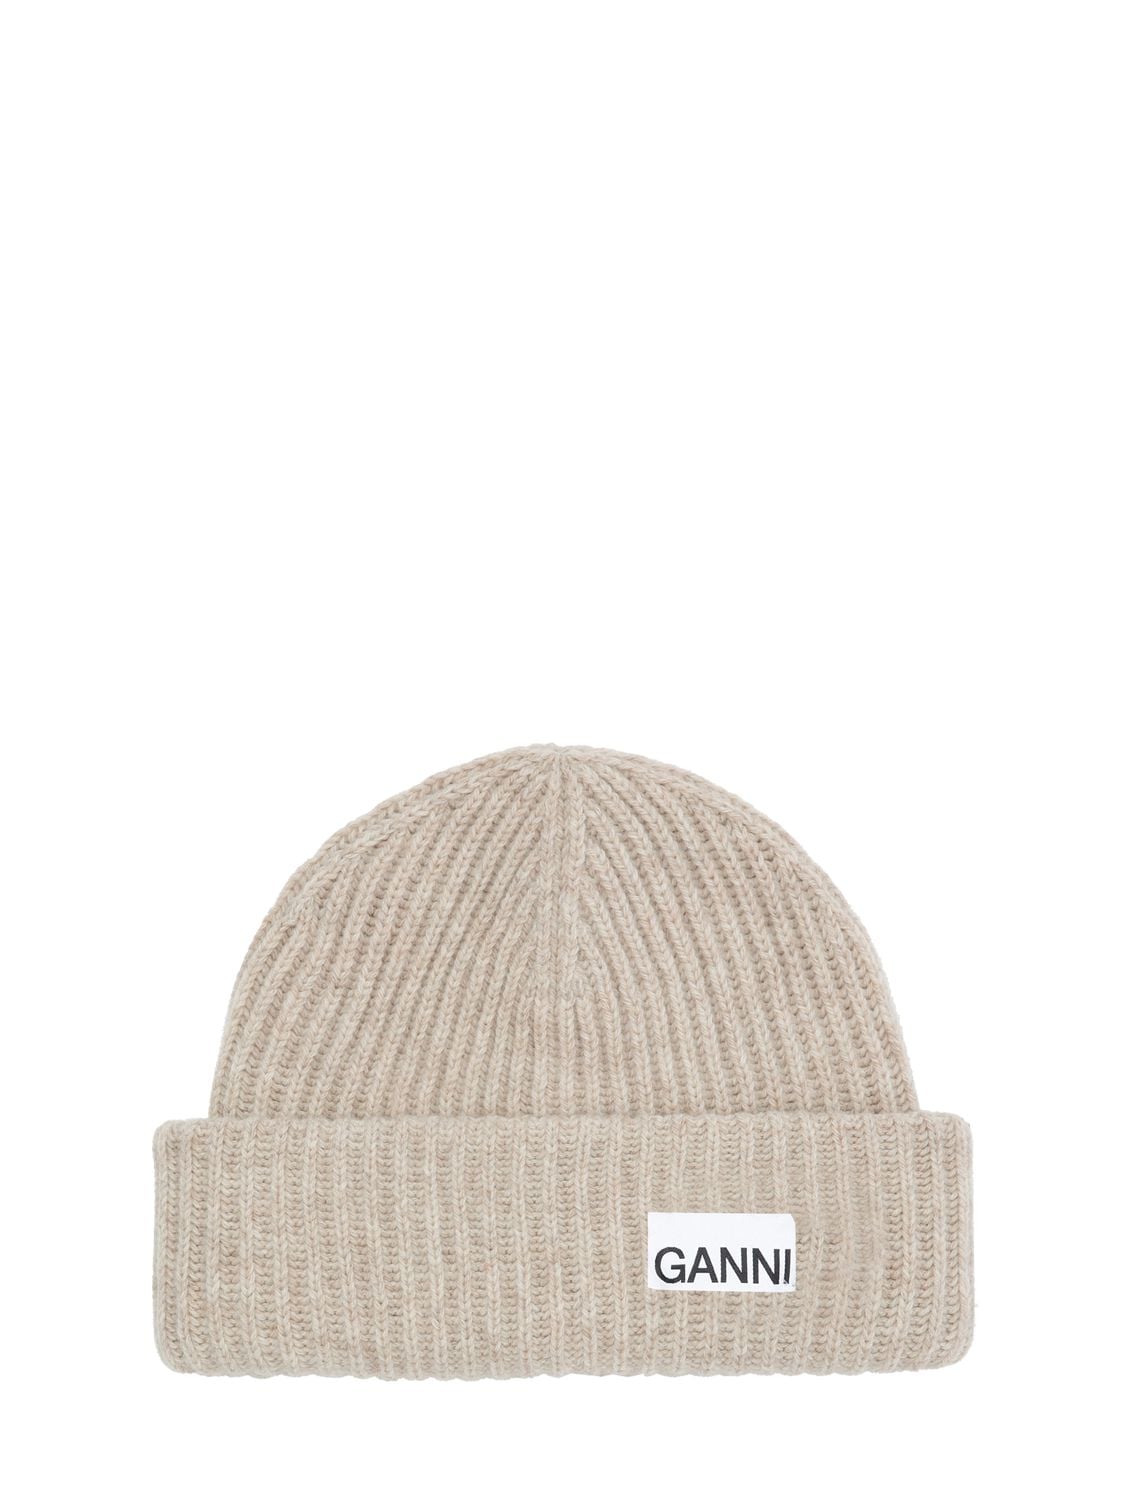 Ganni Structured Ribbed Beanie In Brazilian Sand